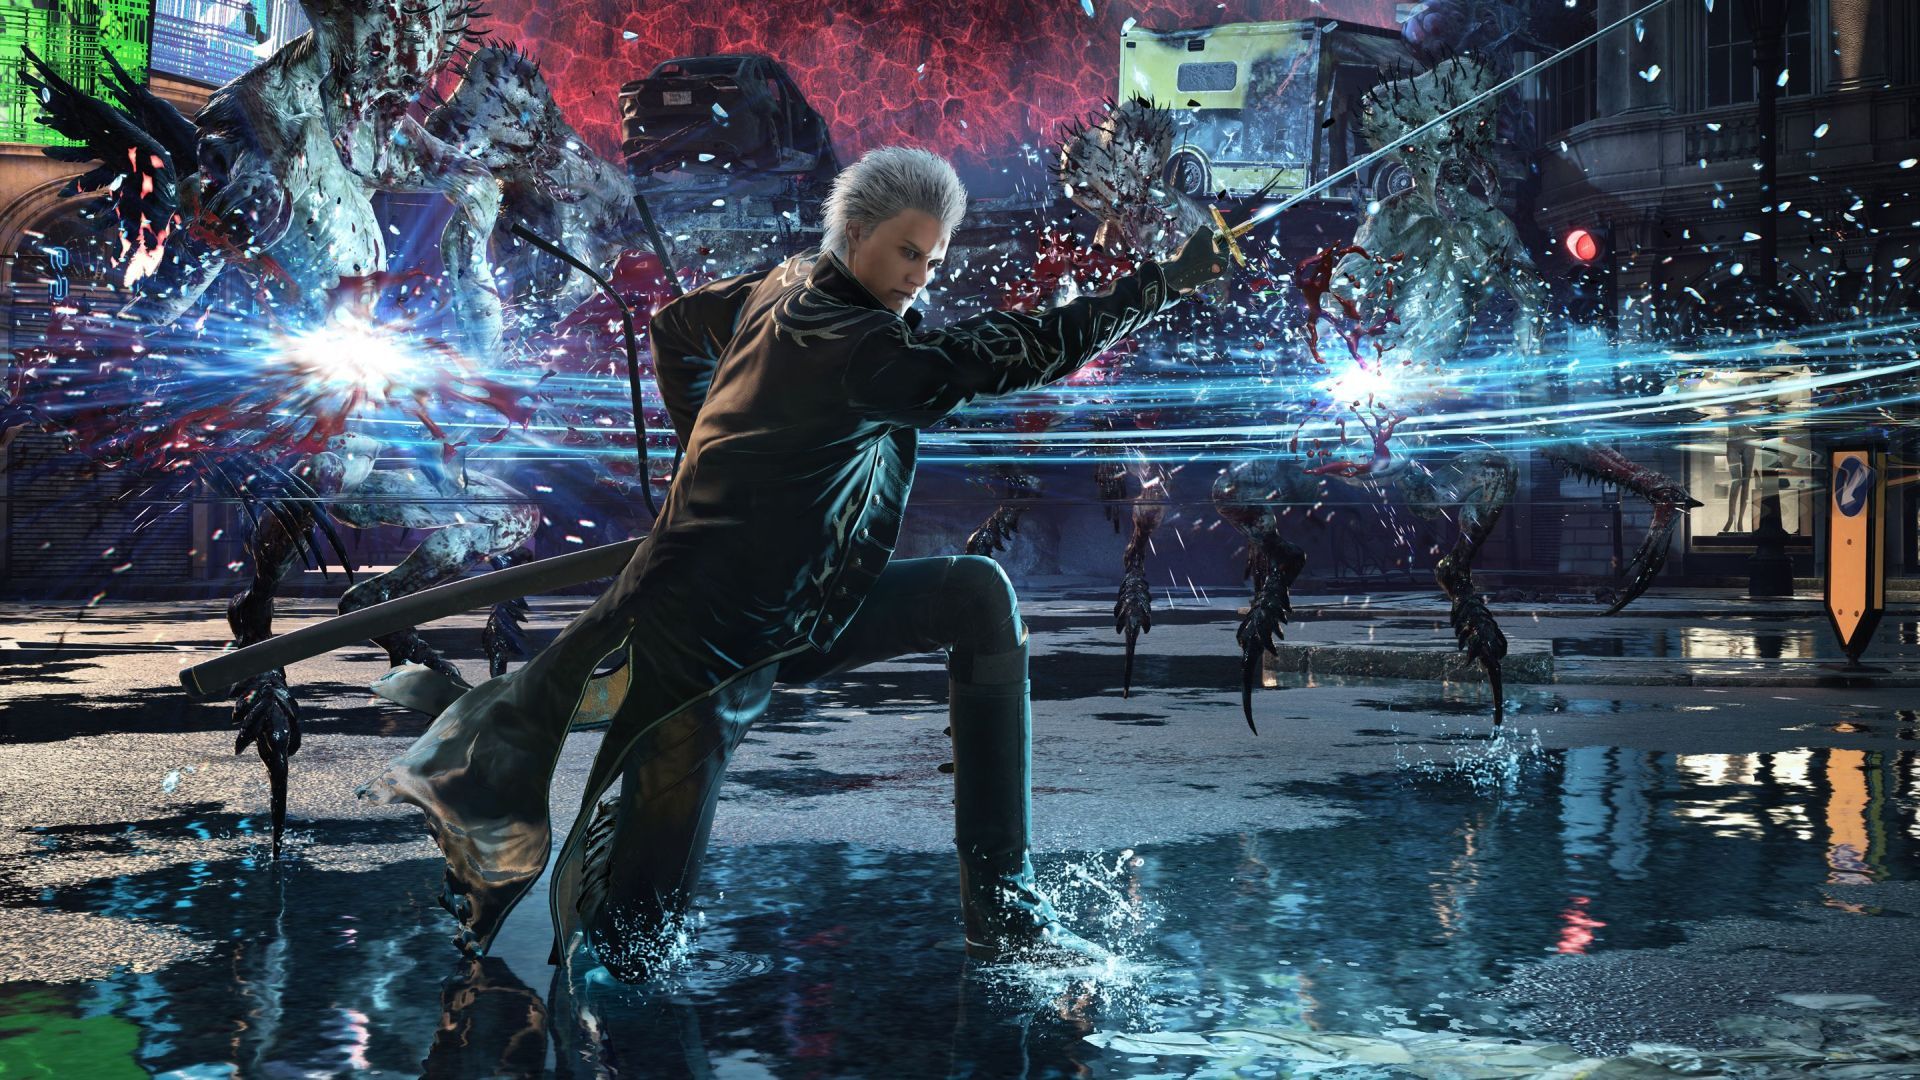 v devil may cry 5 icons